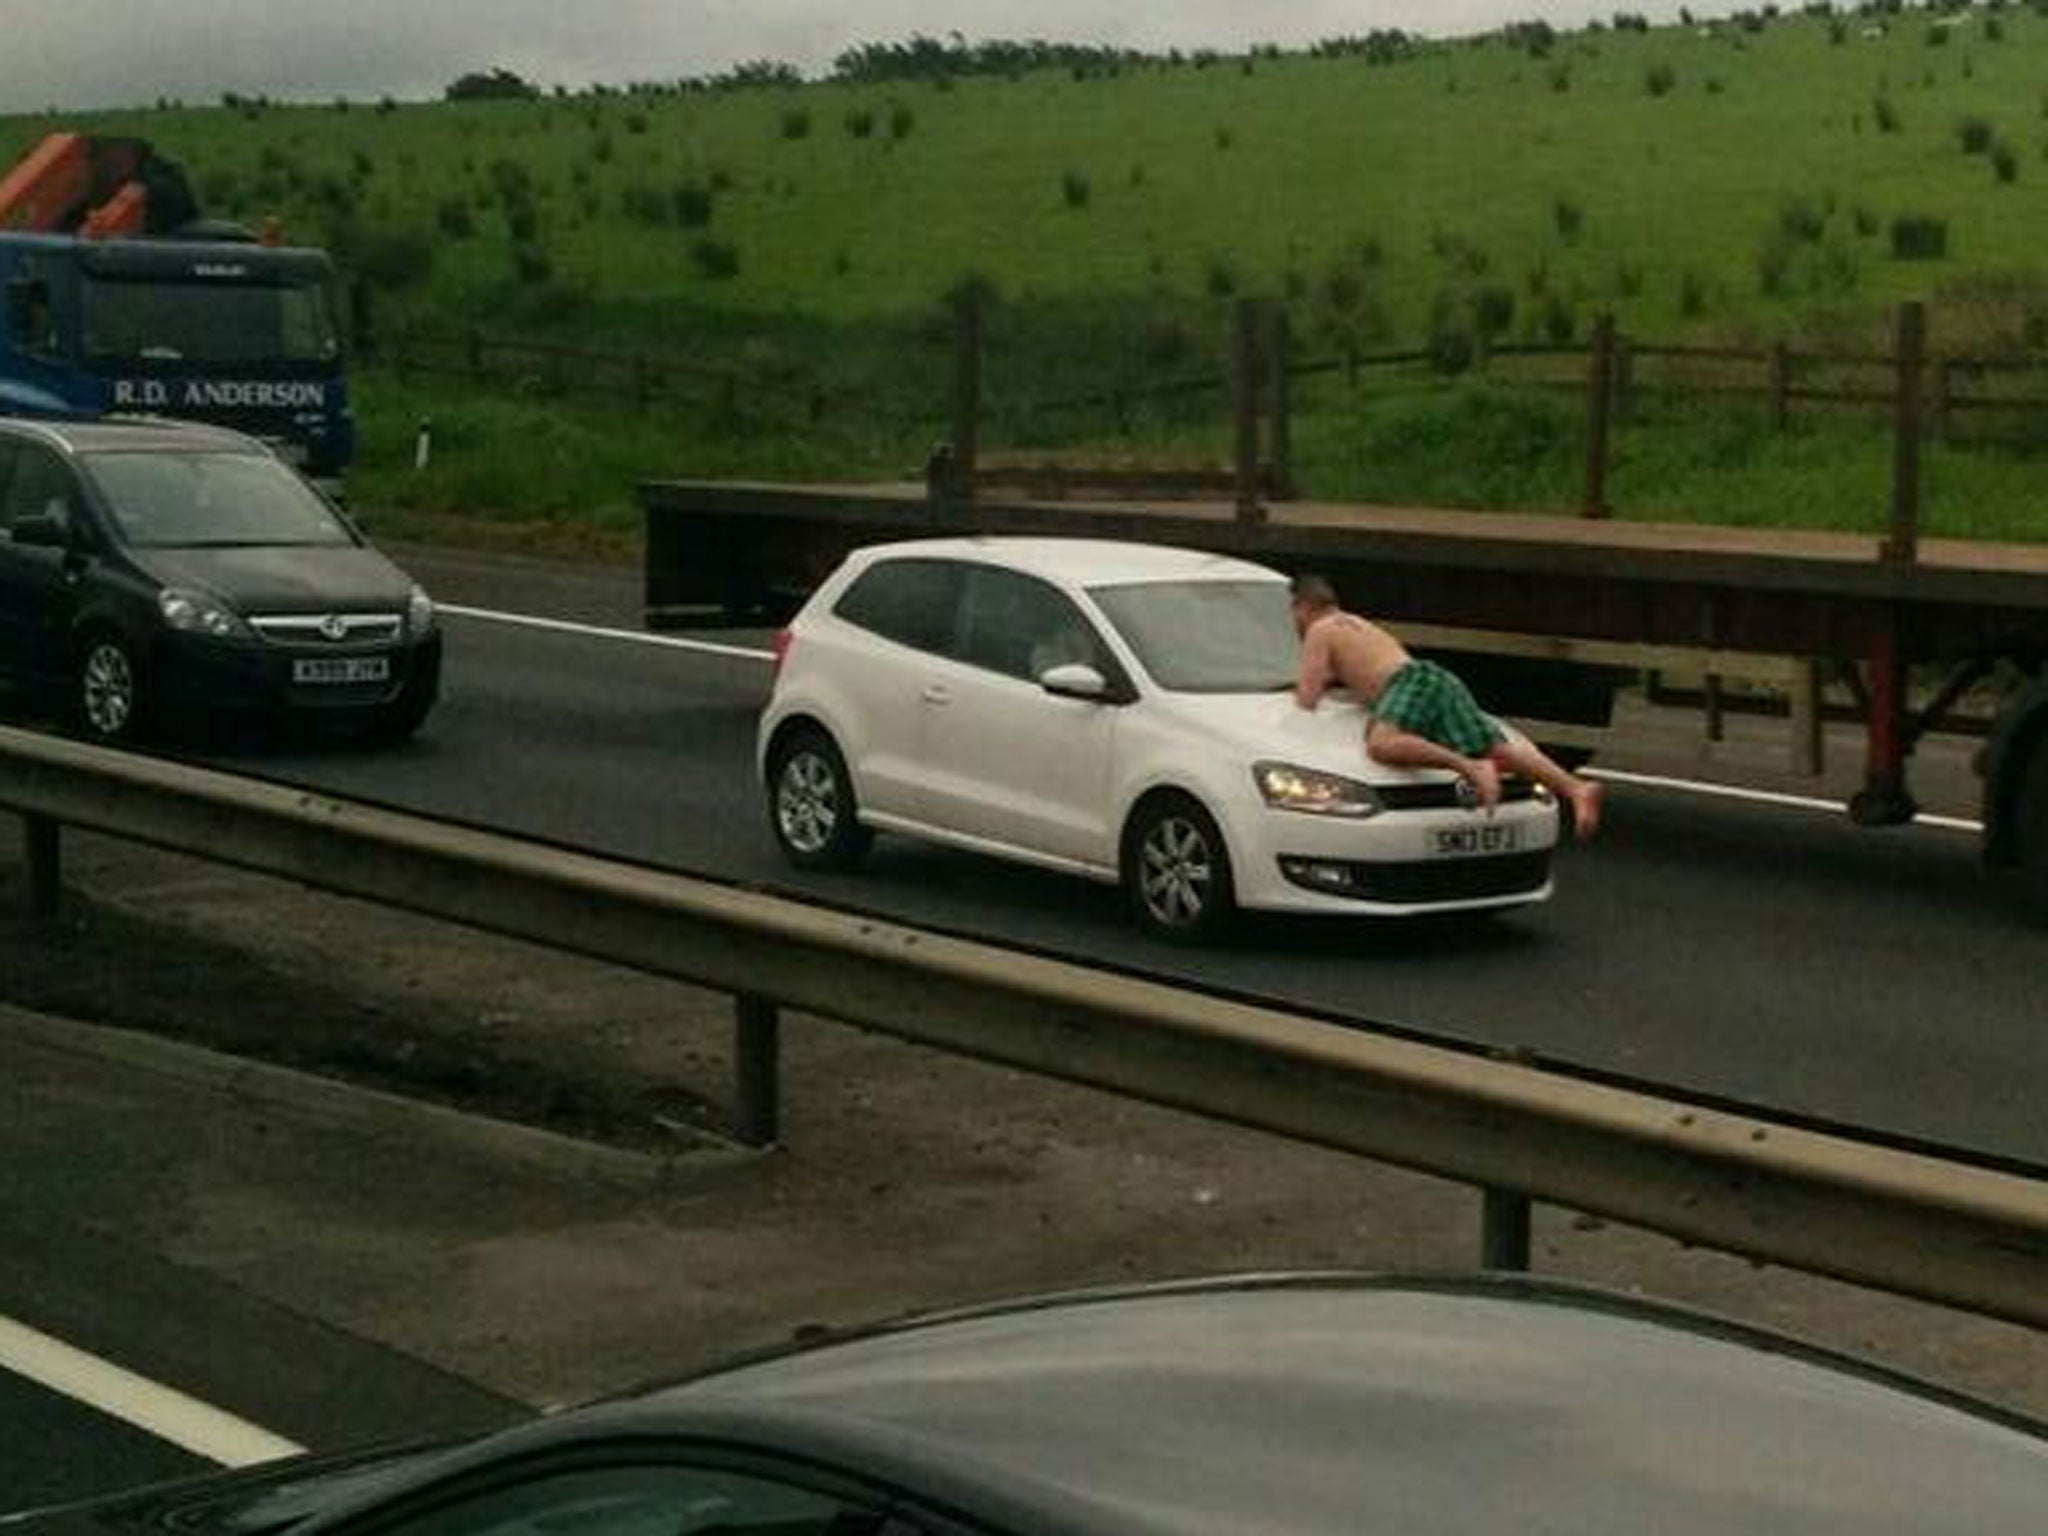 A man caused traffic chaos this morning when he was found wandering along the M8 wearing nothing but green tartan underpants